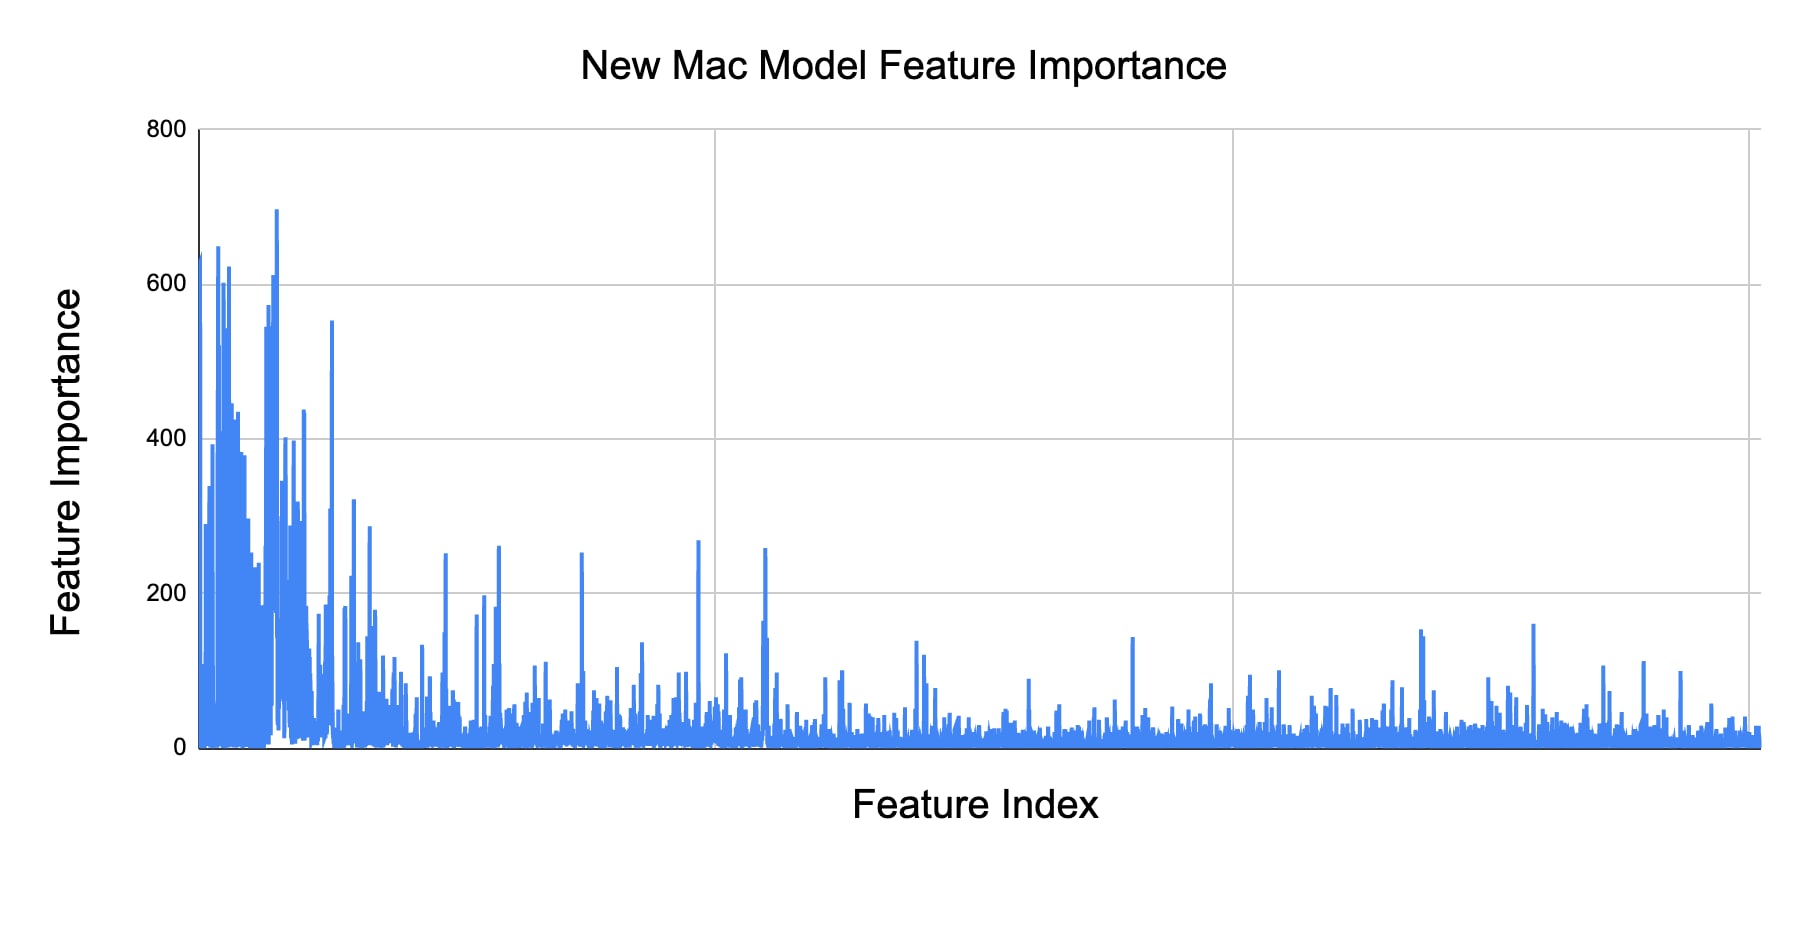 Figure 1: Feature importance graph of the new macOS model.